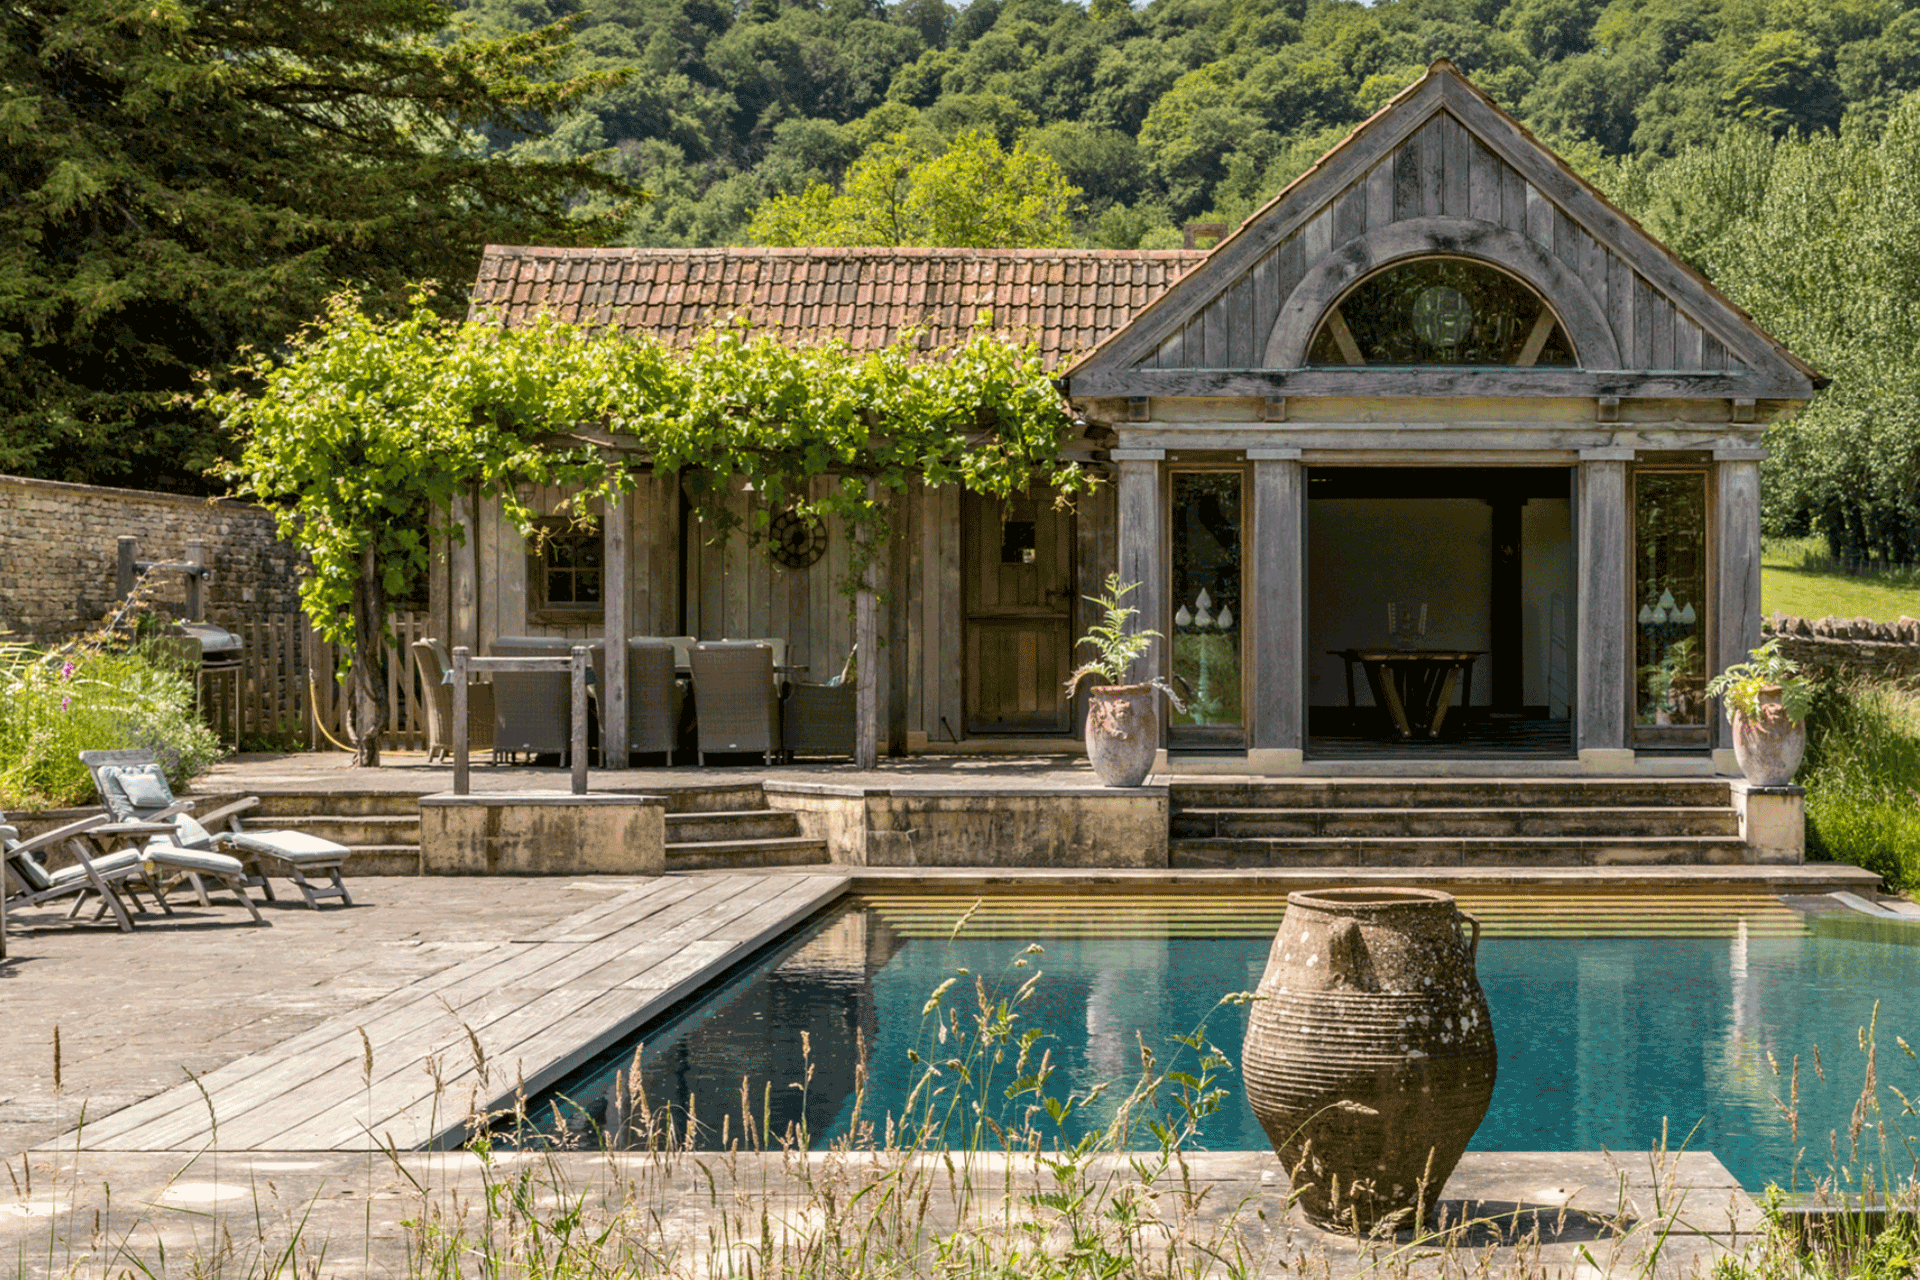 Romanesque pool house with pool in front and shrubs surrounding.